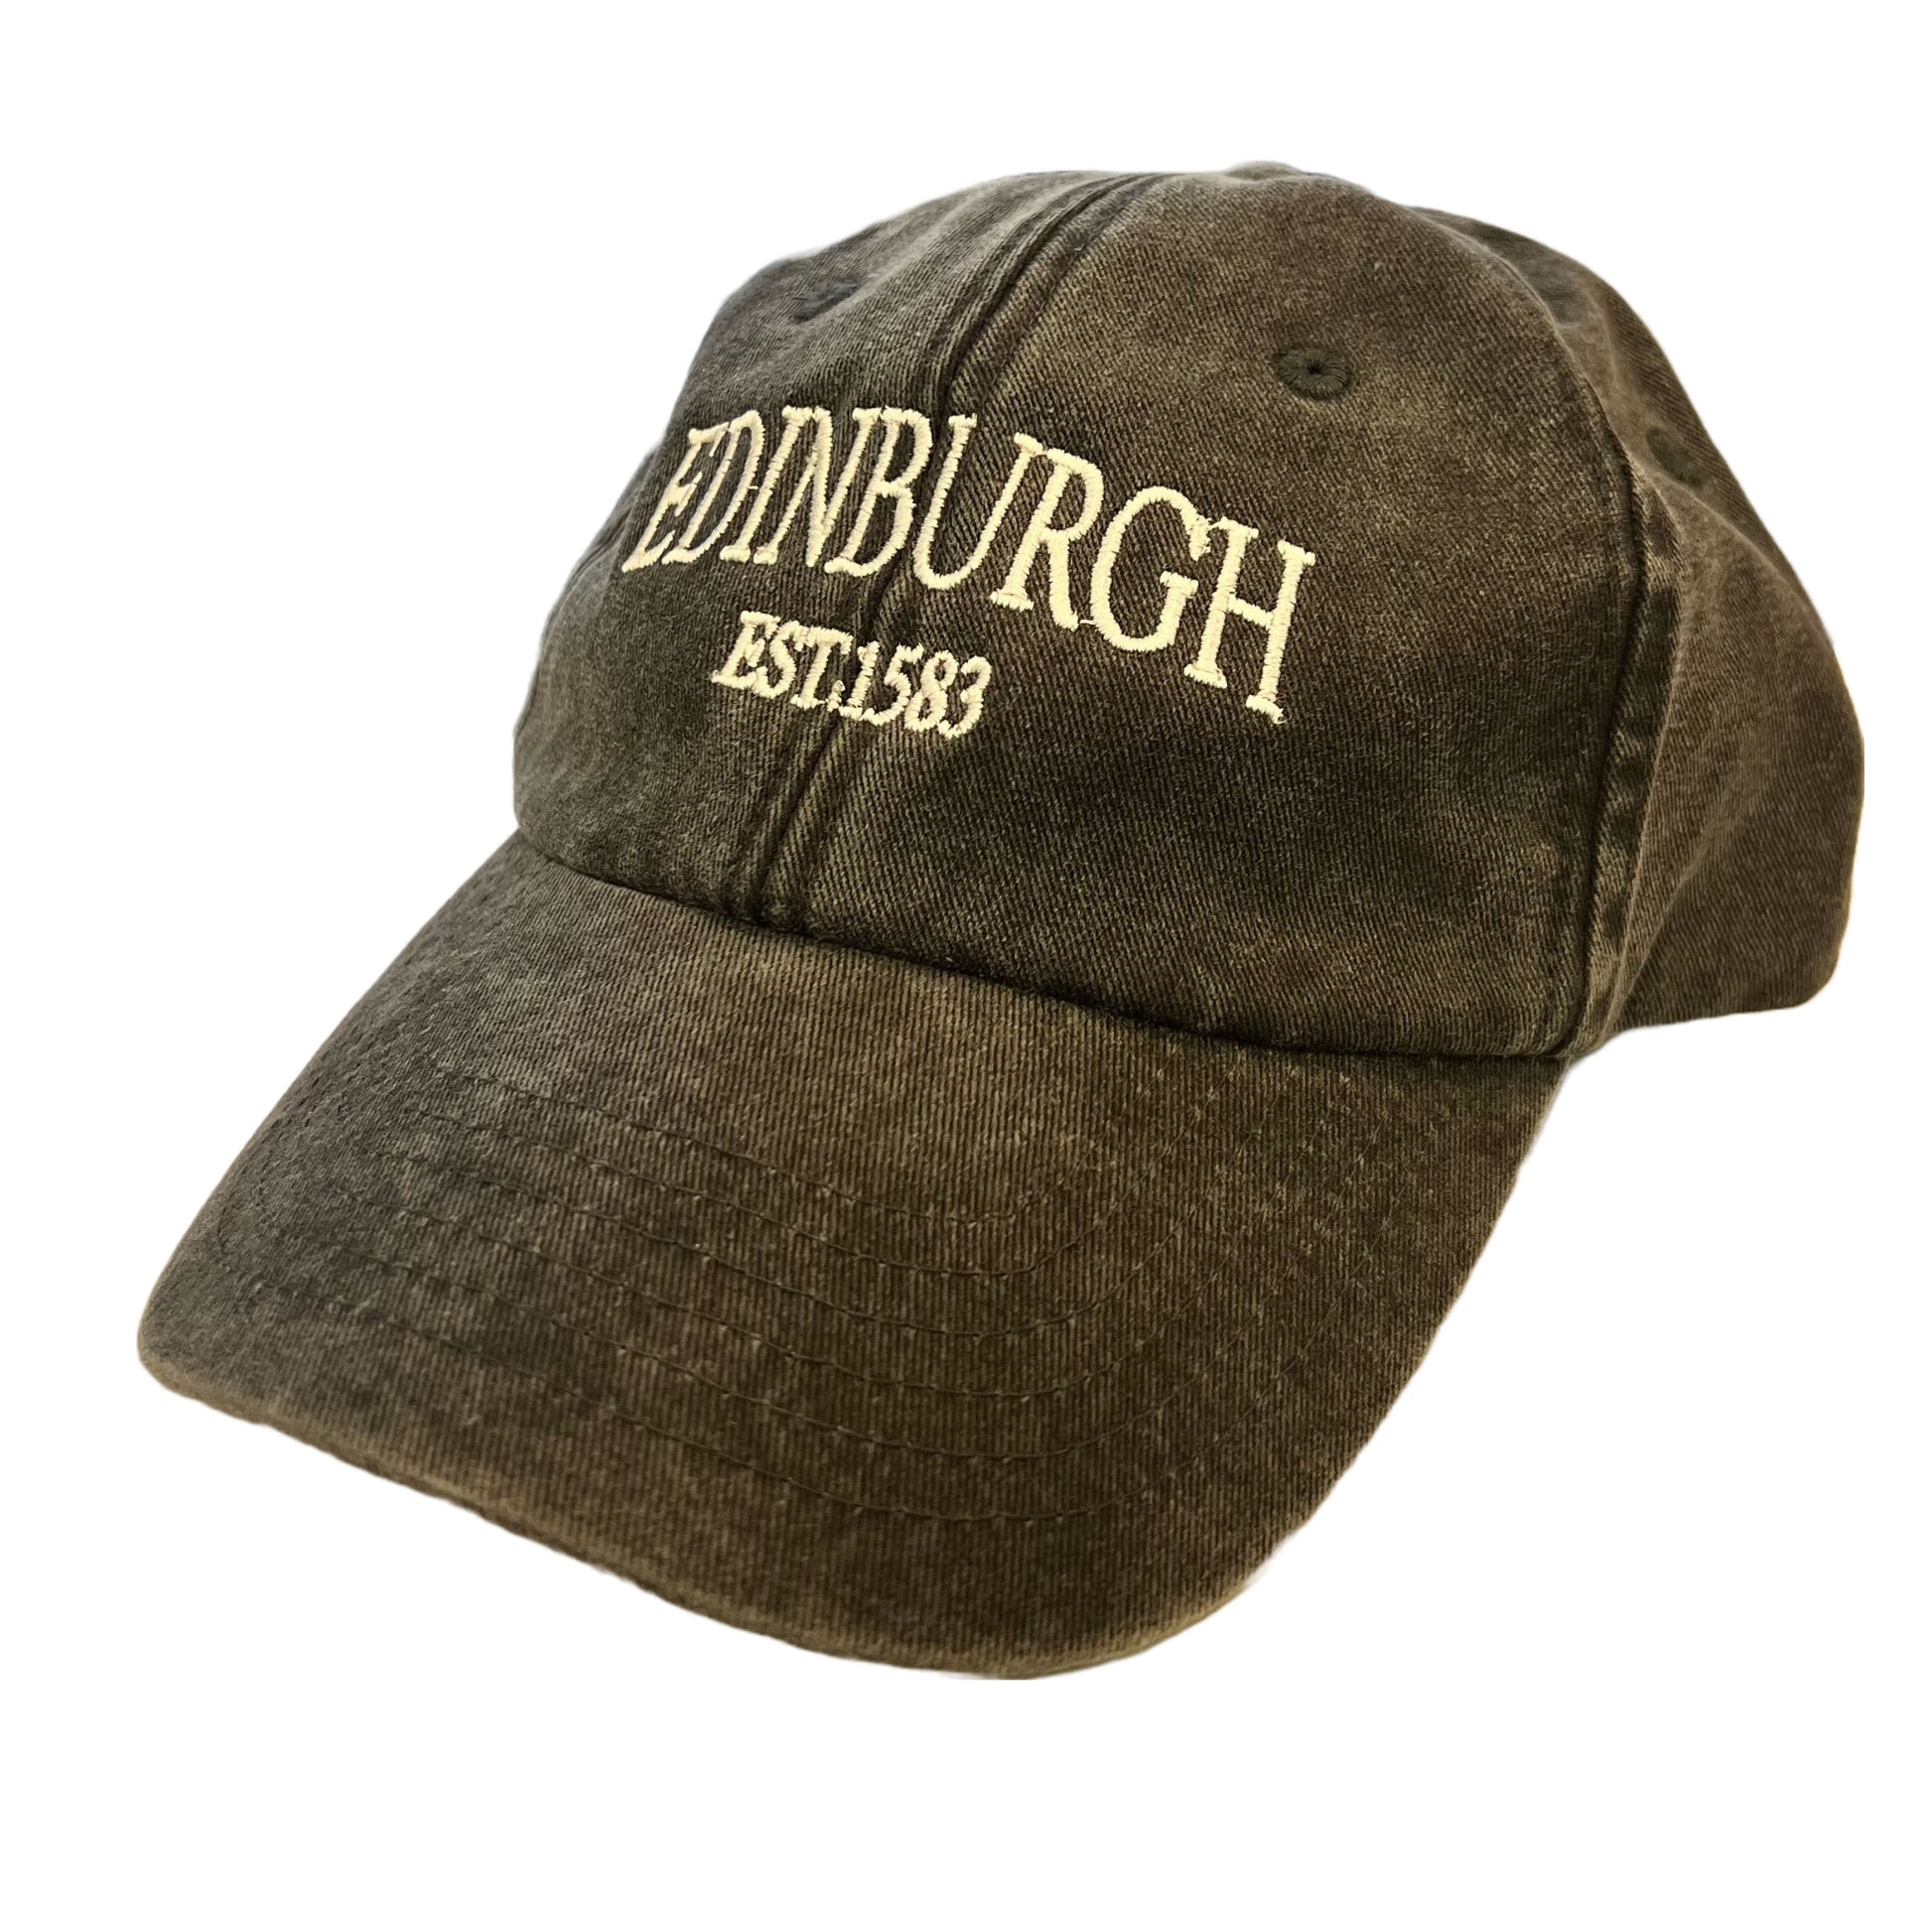 Black baseball cap with 'EDINBURGH EST. 1583' embroidered in white on the front